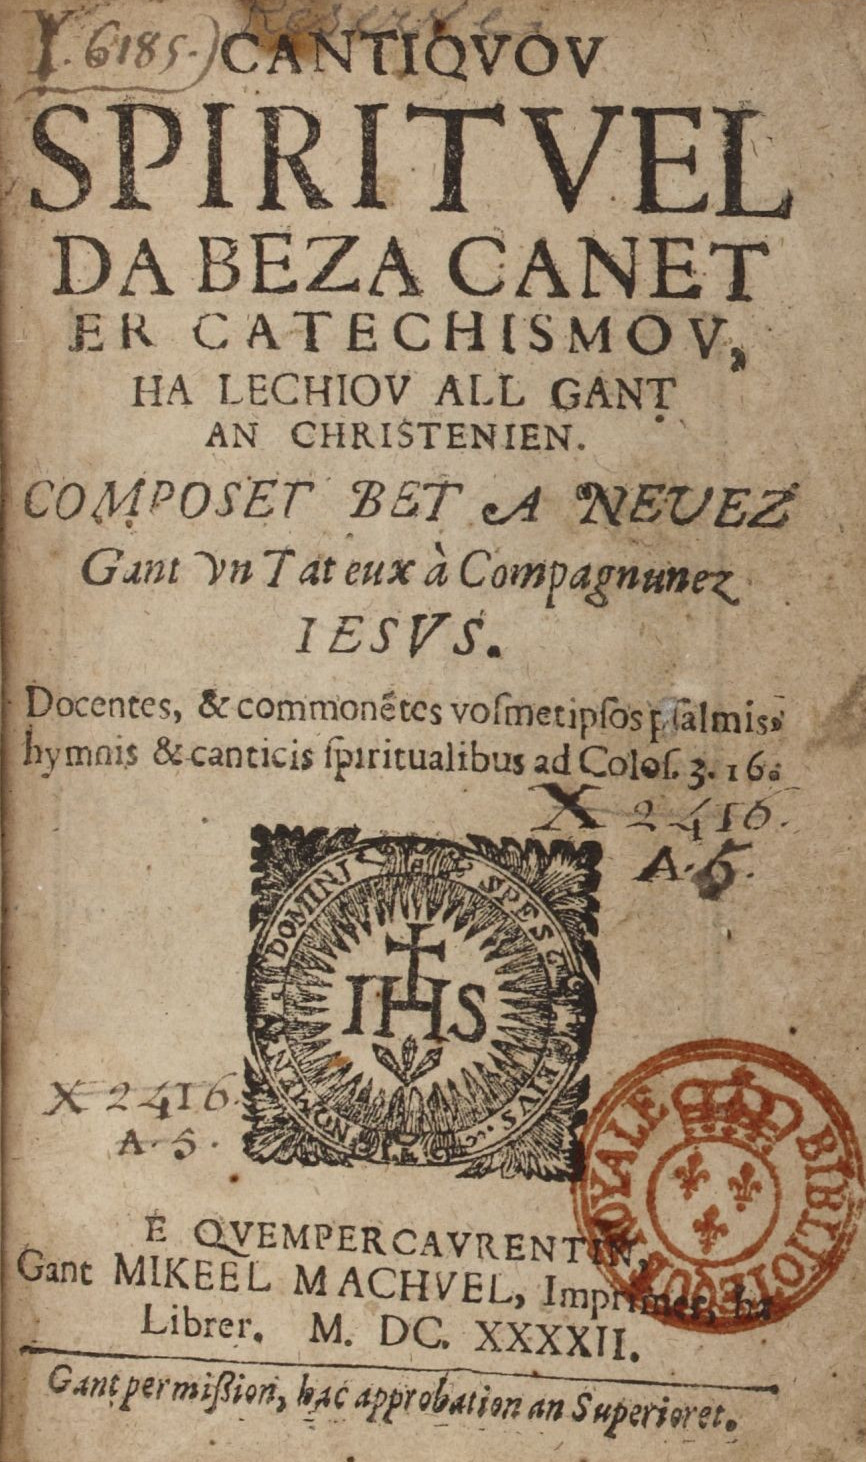 Spiritual hymns to be sung at catechism and other places by Christians, formerly and newly composed by a father from the Jesus Compagnie, by M Machuel (Quimper, Caurentin), 1642- BnF  (National Library of France) Department for the Collection of rare books.